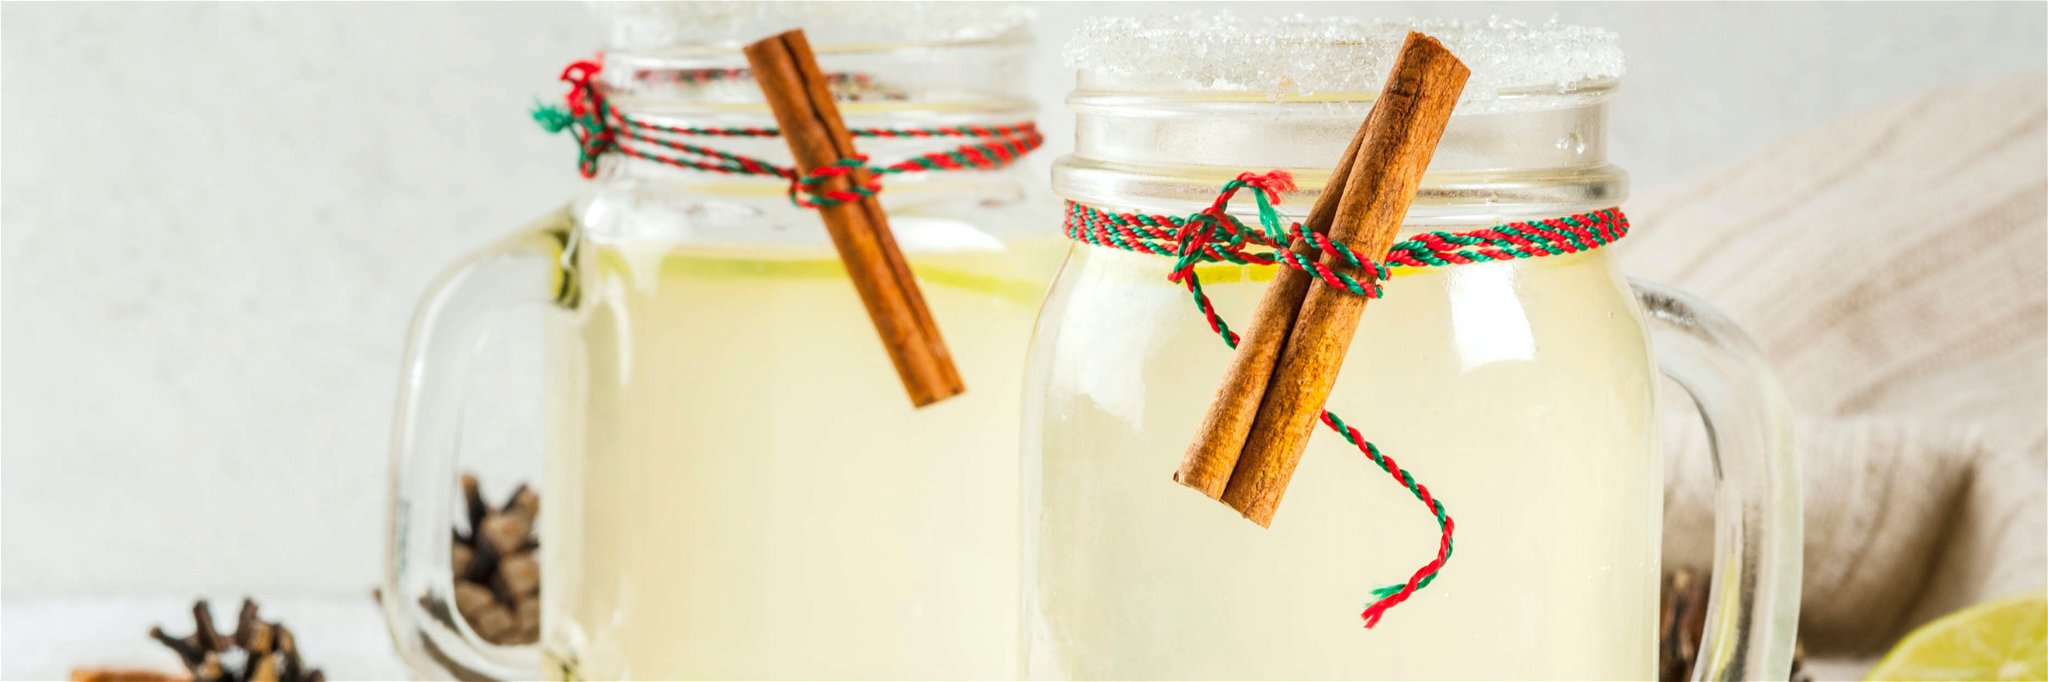 Snowball cocktails can be garnished with cherries or even a stick of cinnamon.&nbsp;